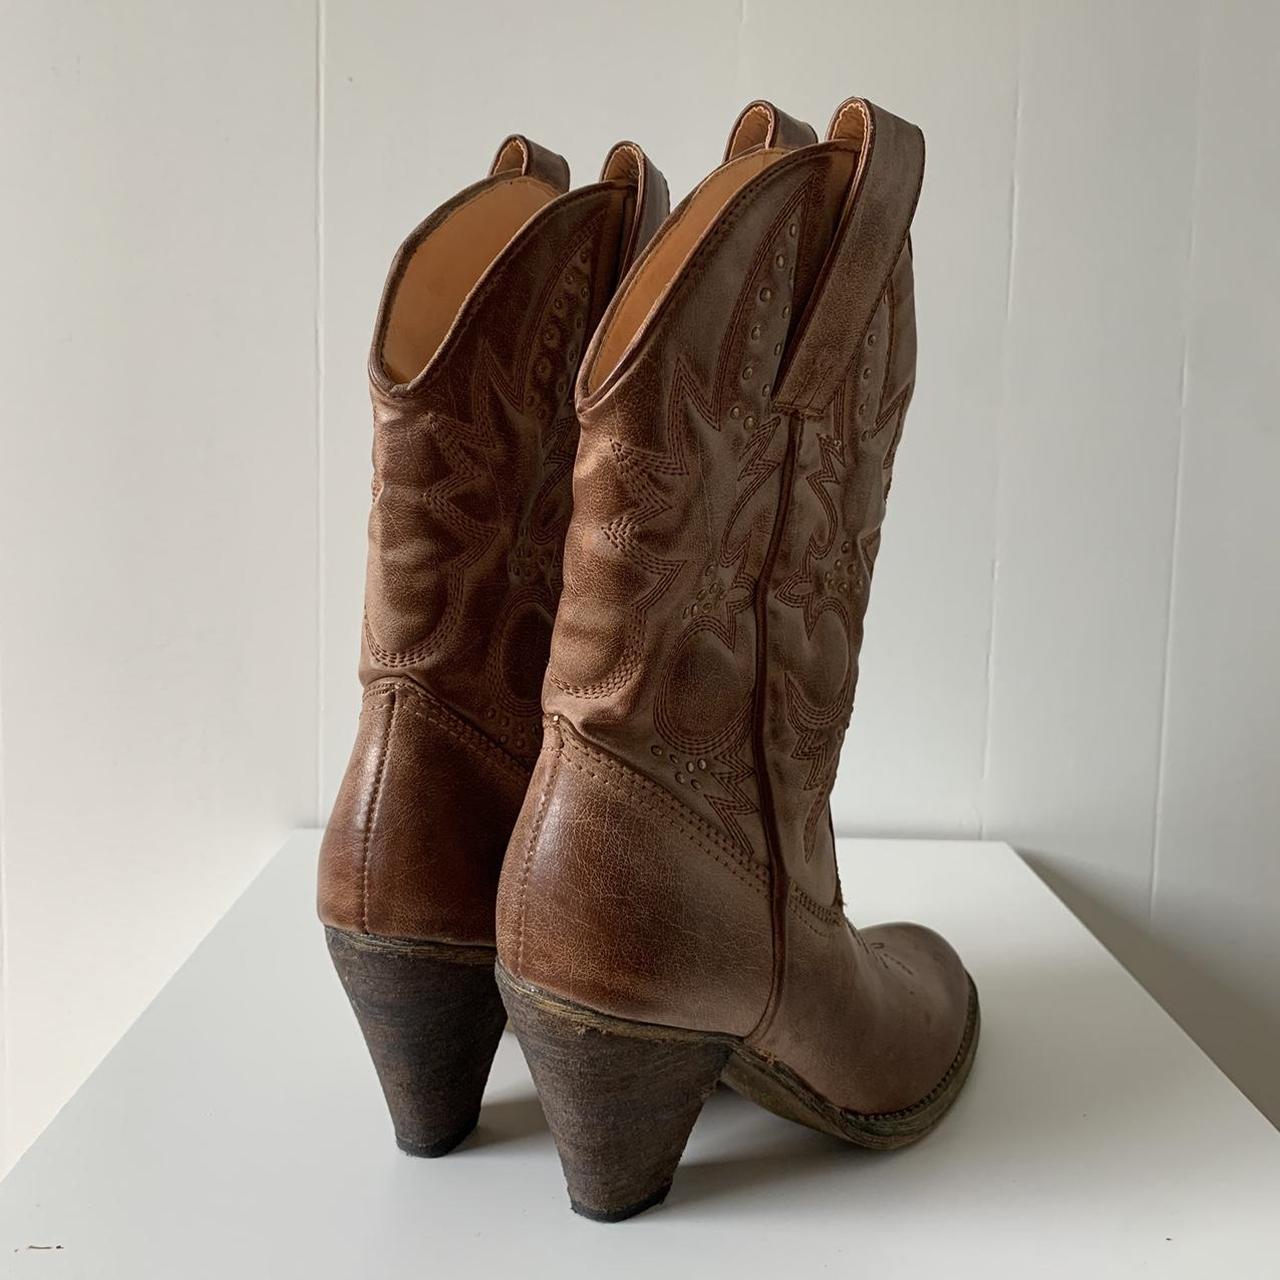 Very Volatile Women's Tan and Brown Boots | Depop